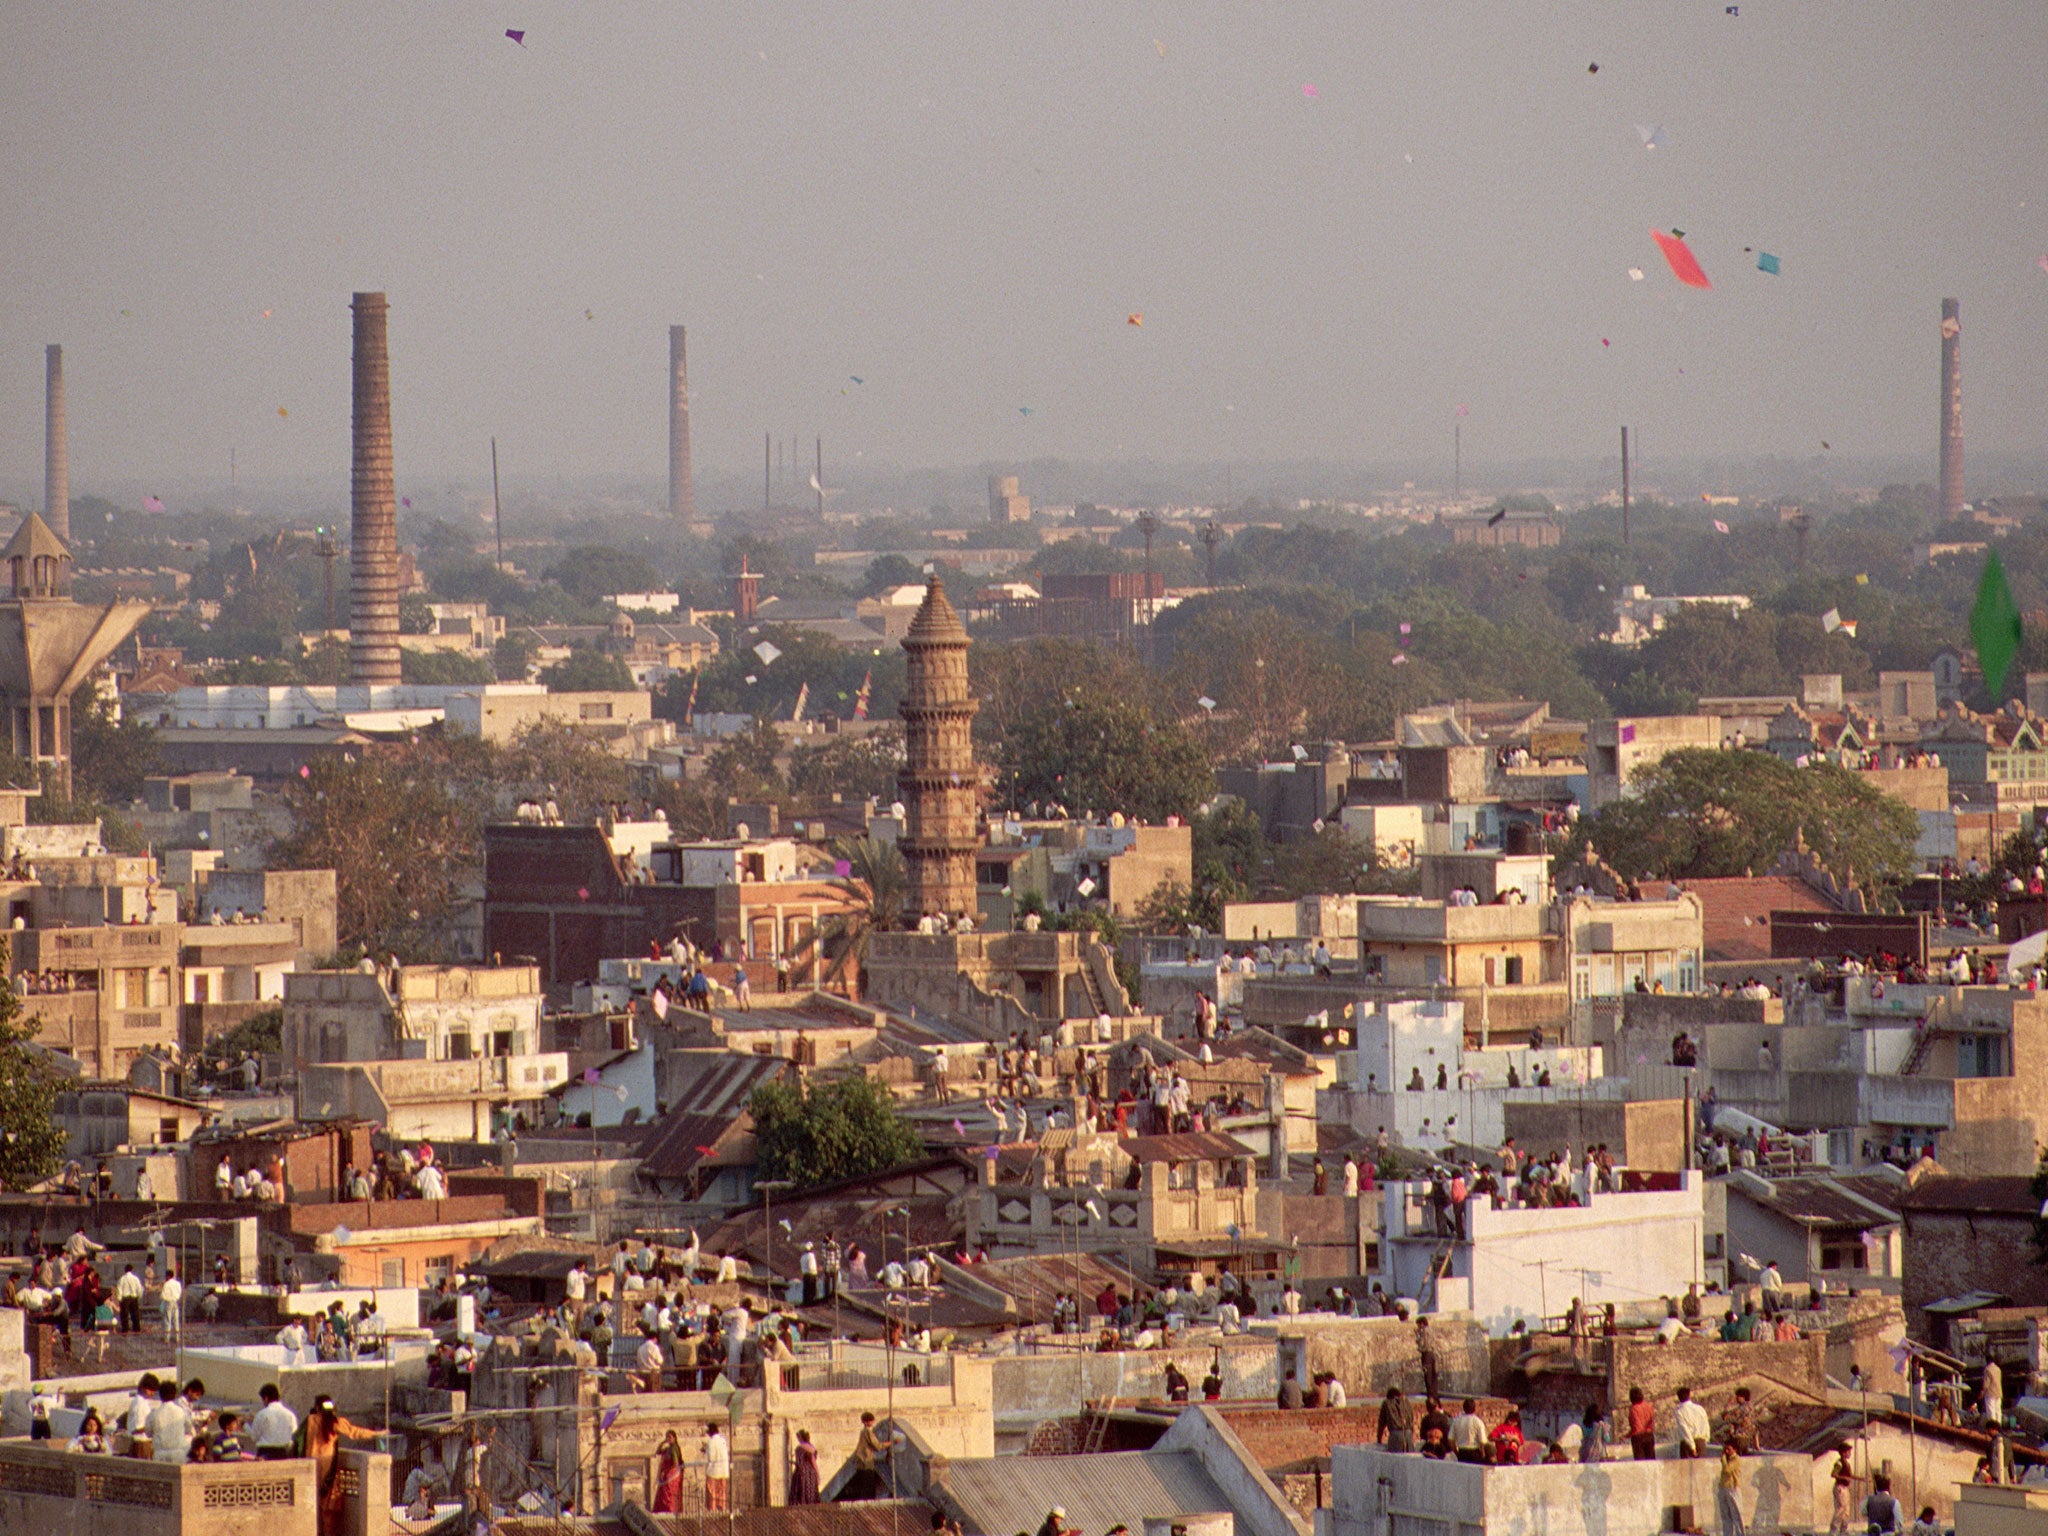 Ahmedabad bears the imprint of various Indians